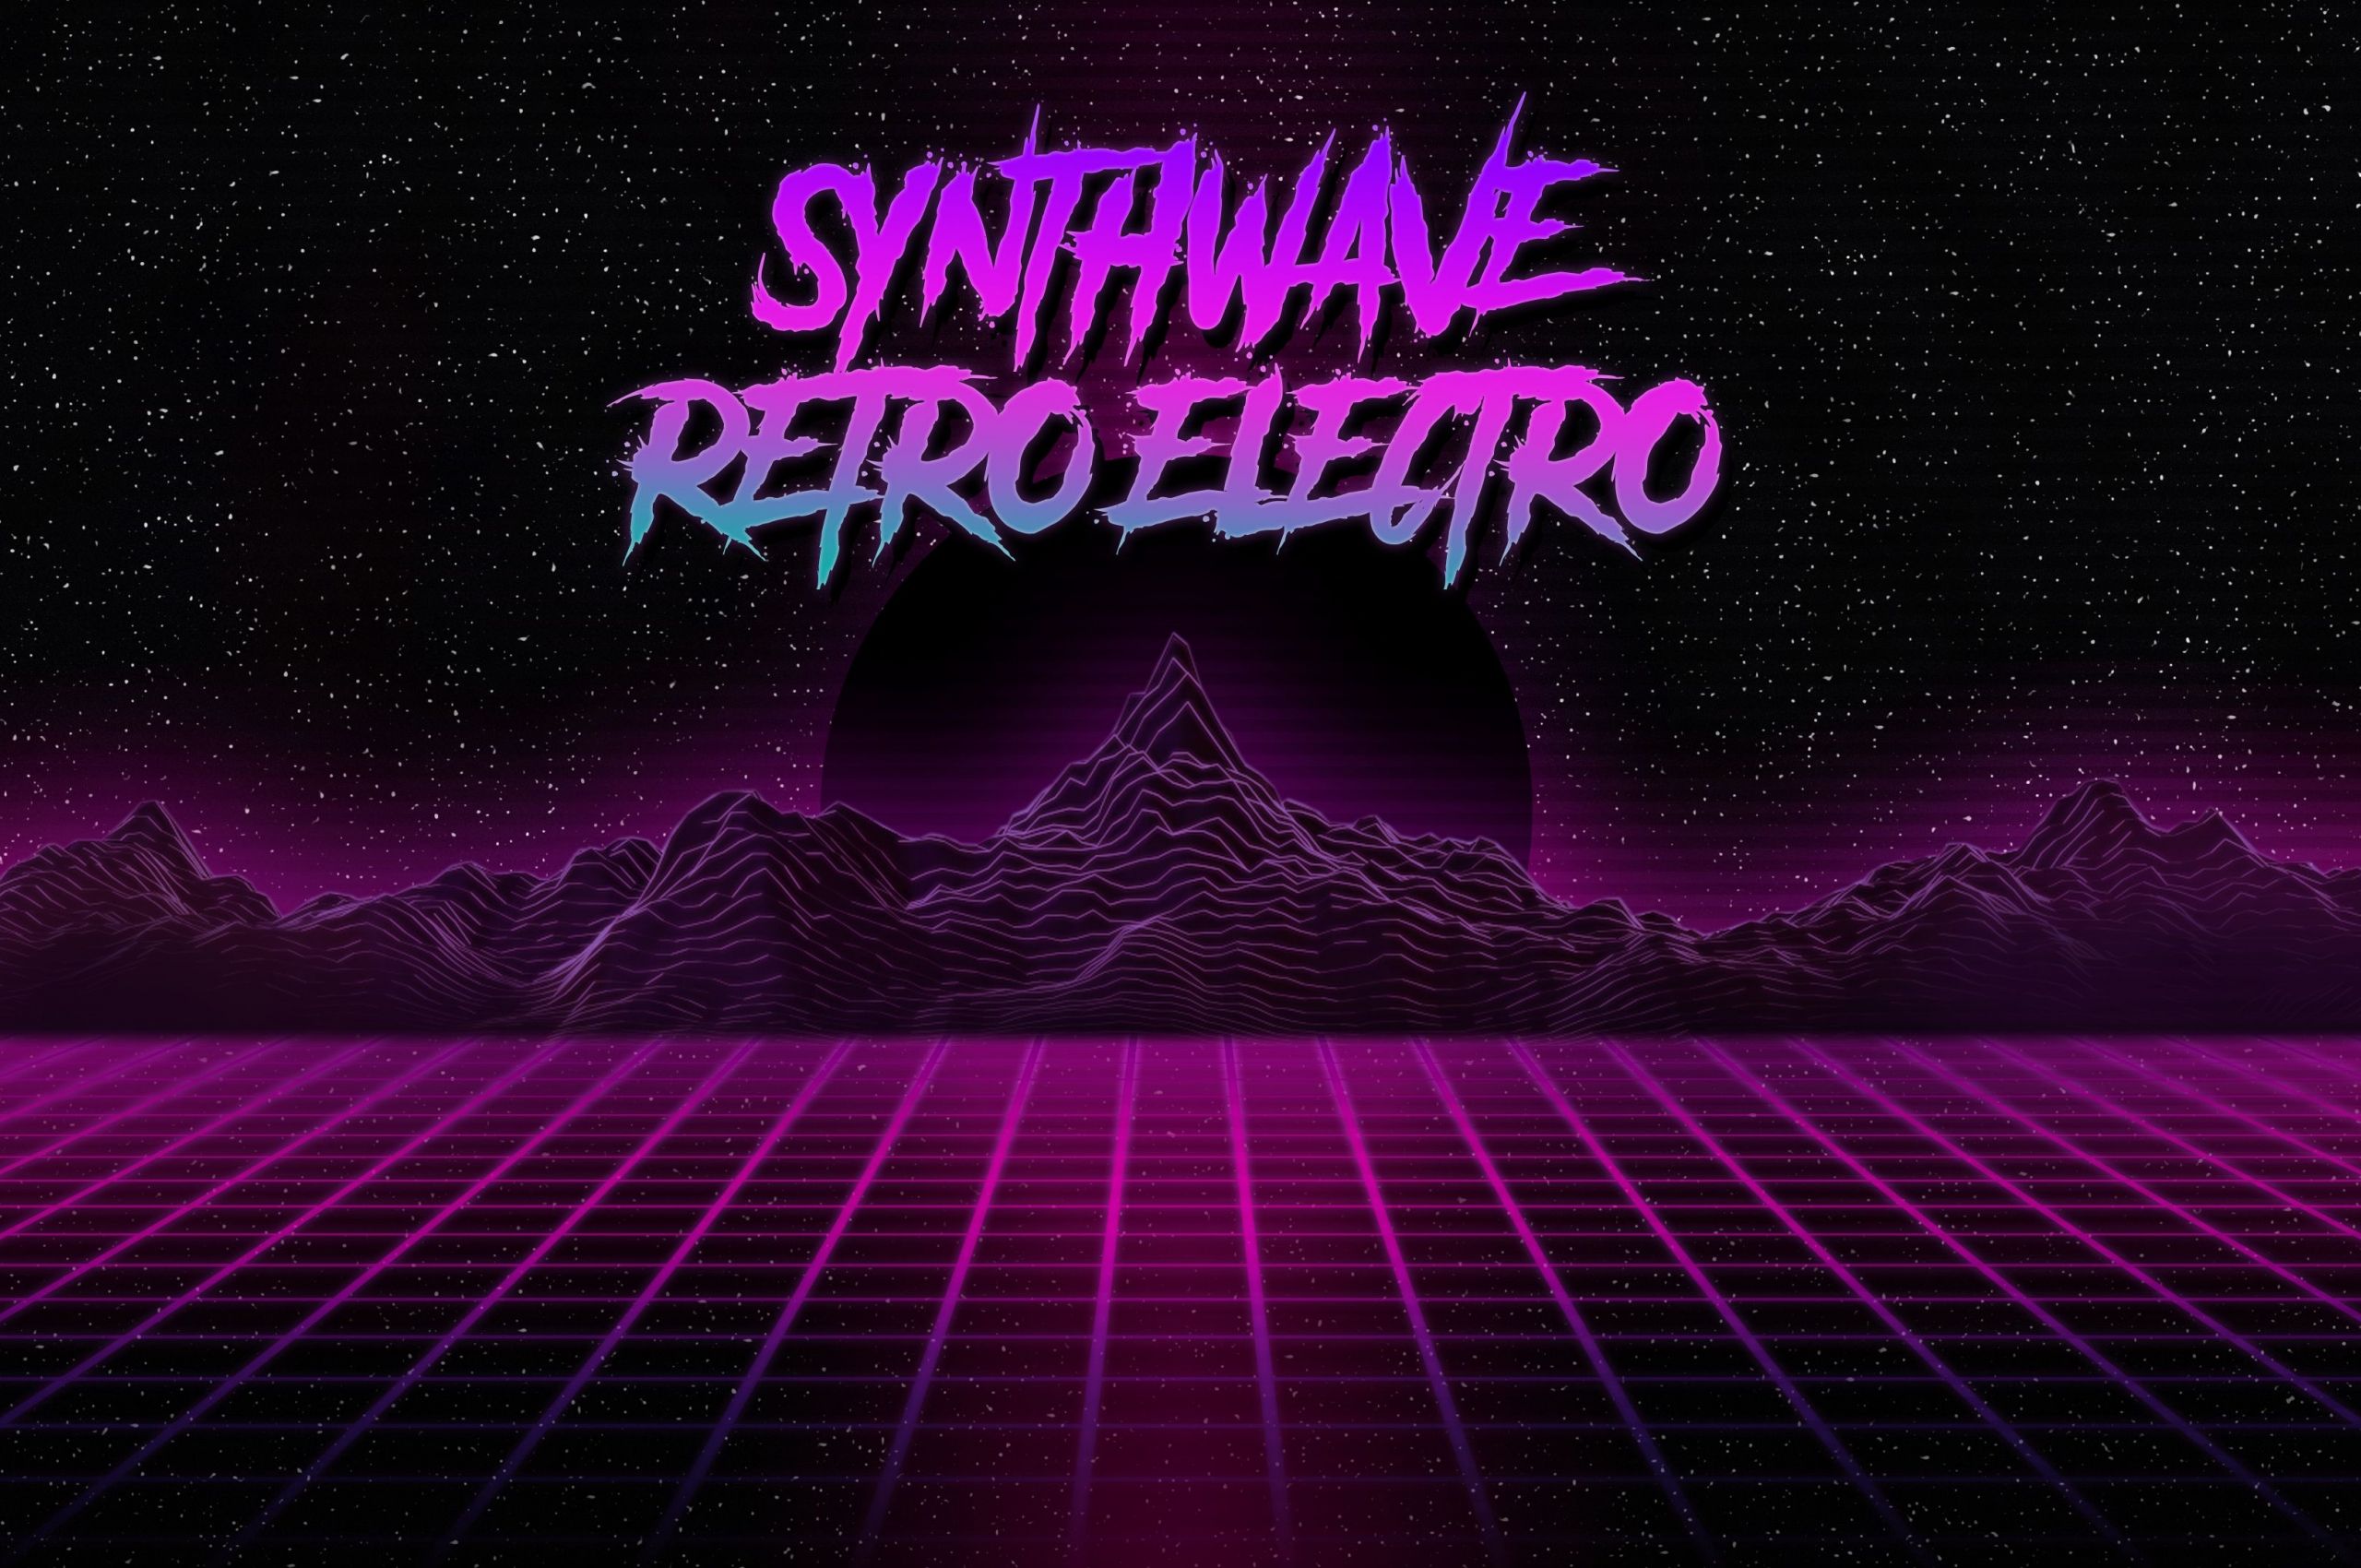 Free download Synthwave Retro Electro Wallpaper [3840x2160]